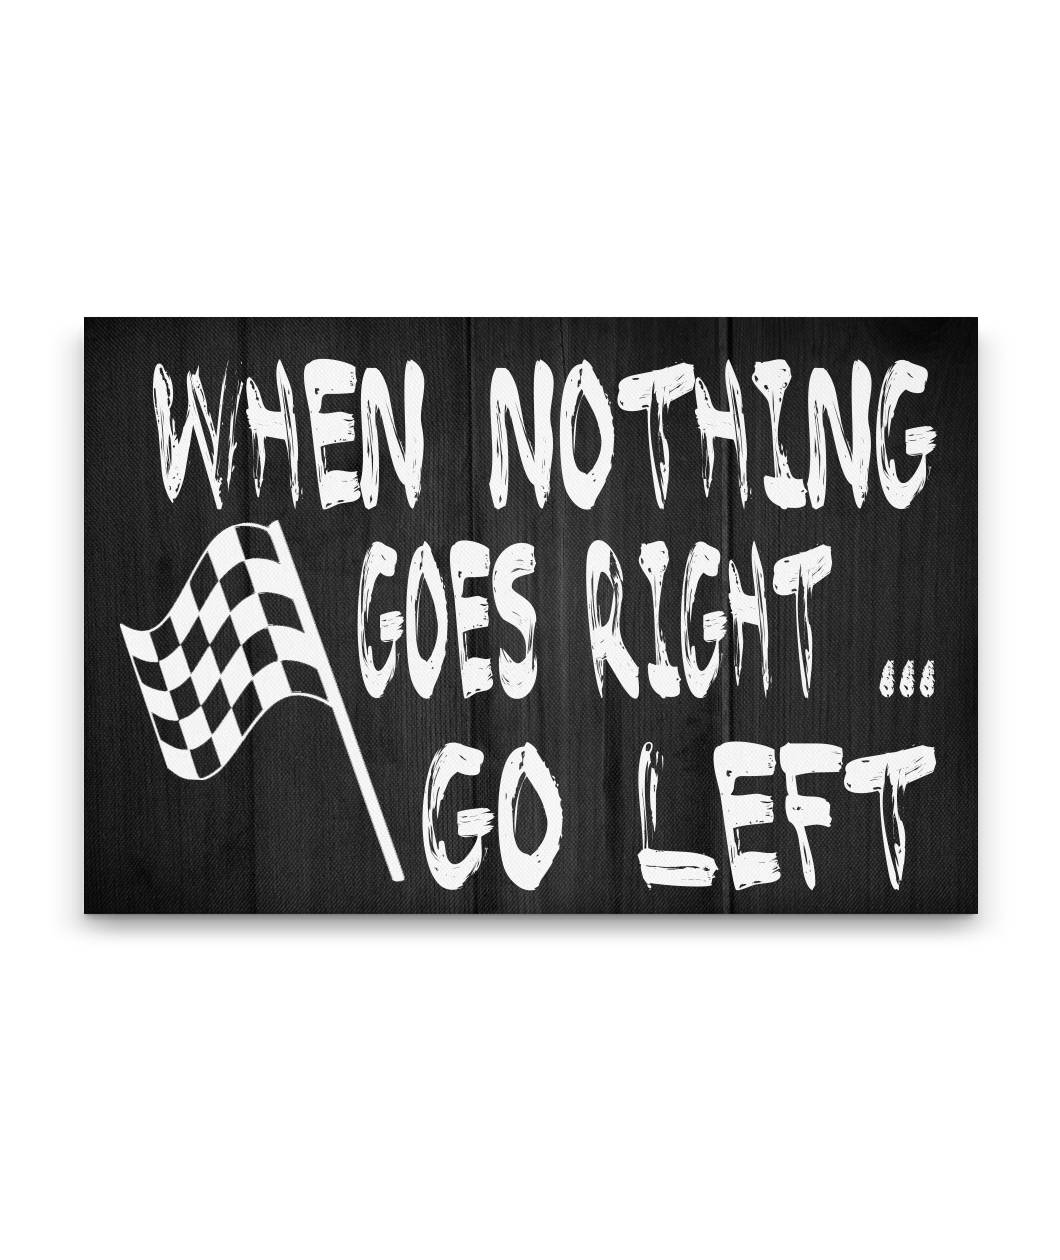 When Nothing Goes Right Go Left Canvas – Landscape 24X16